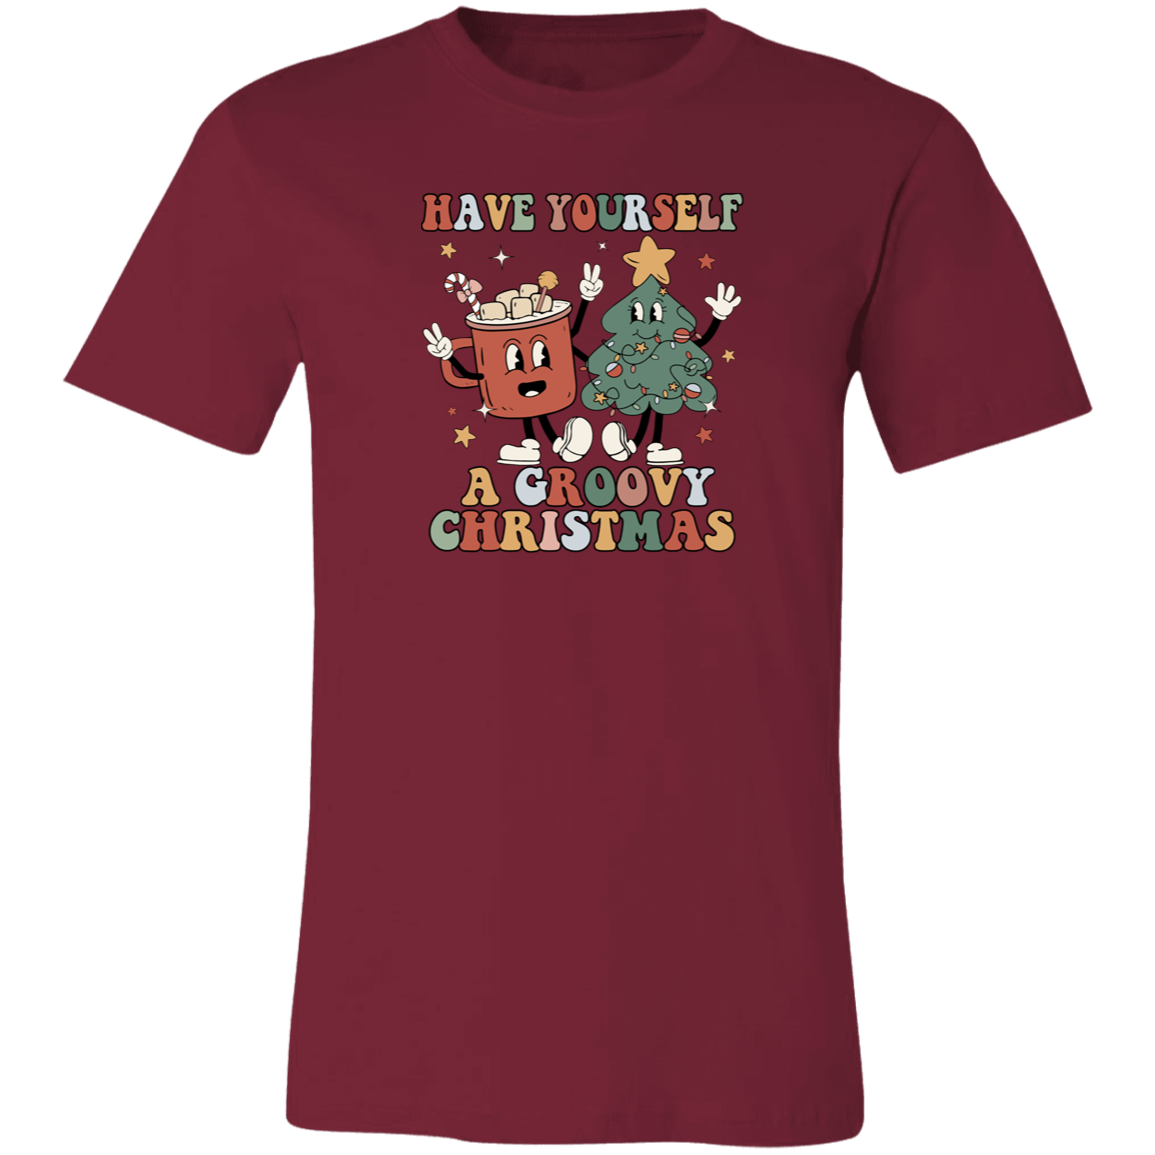 Have Yourself A Groovy Christmas Shirt